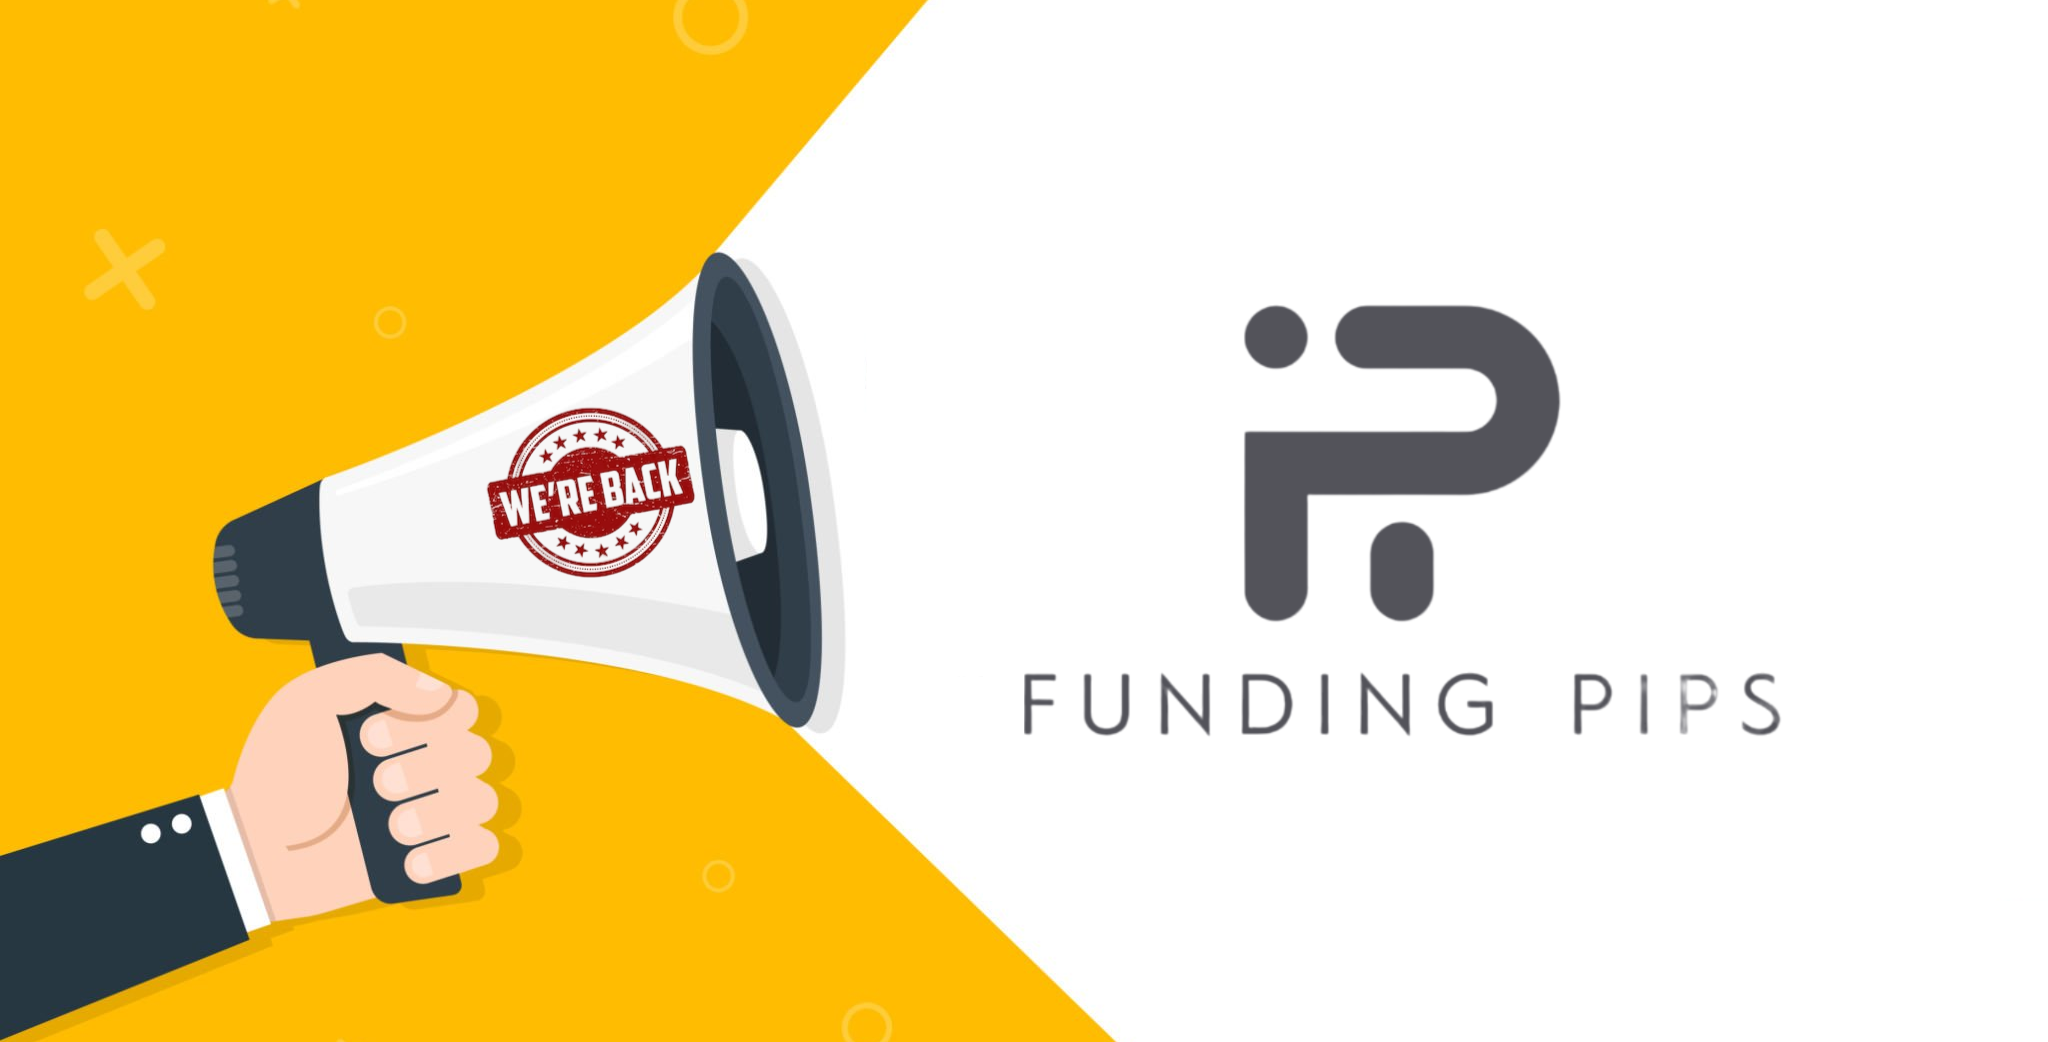 Funding Pips has relaunched operations after adopting Match-Trader, with plans to integrate cTrader and TradeLocker soon, in the wake of issues related to meta-trader platforms.